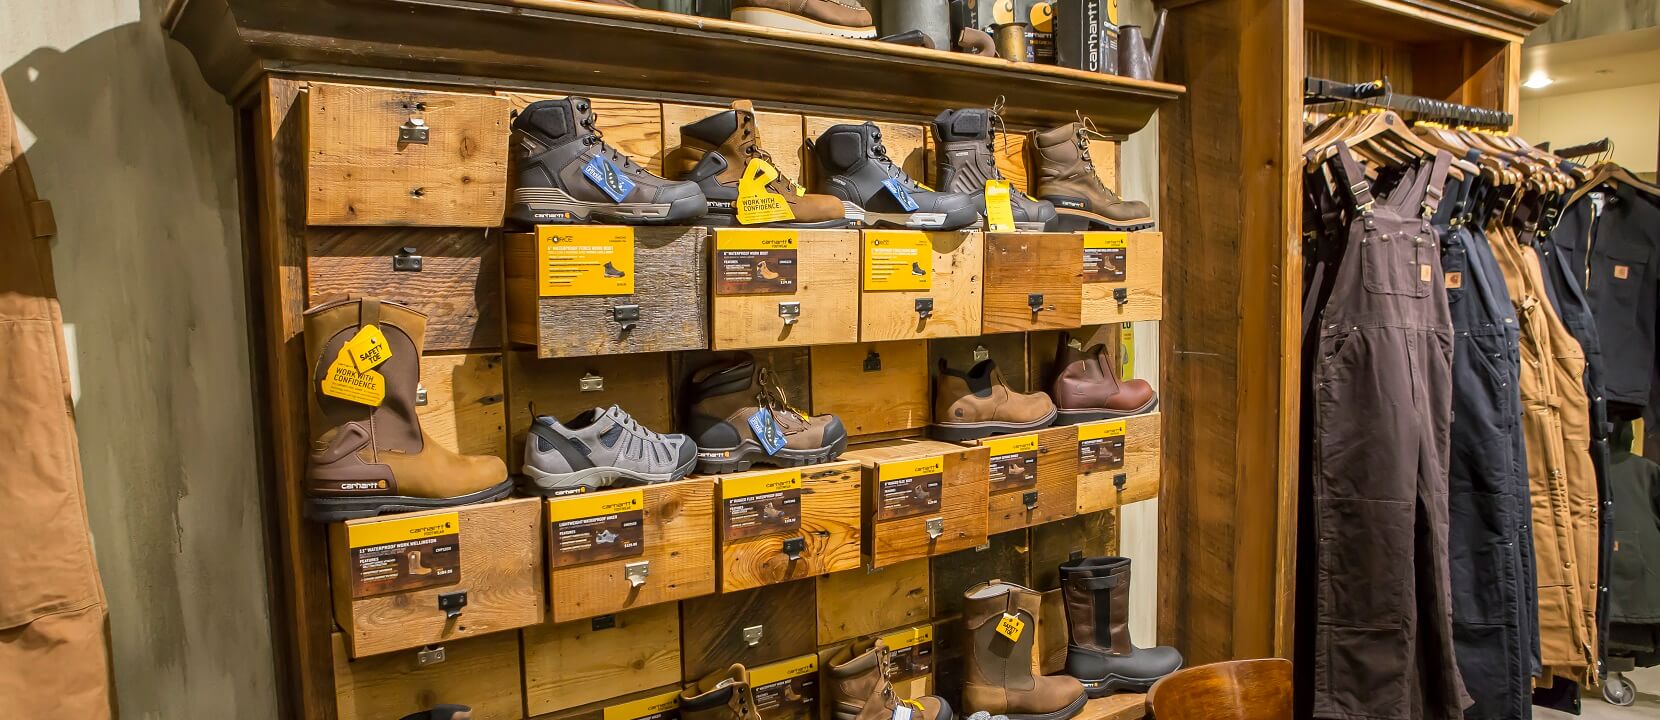 Nationwide Fixture Installations Inc Carhartt Case Study Millwork Packages Shop-in-Shop